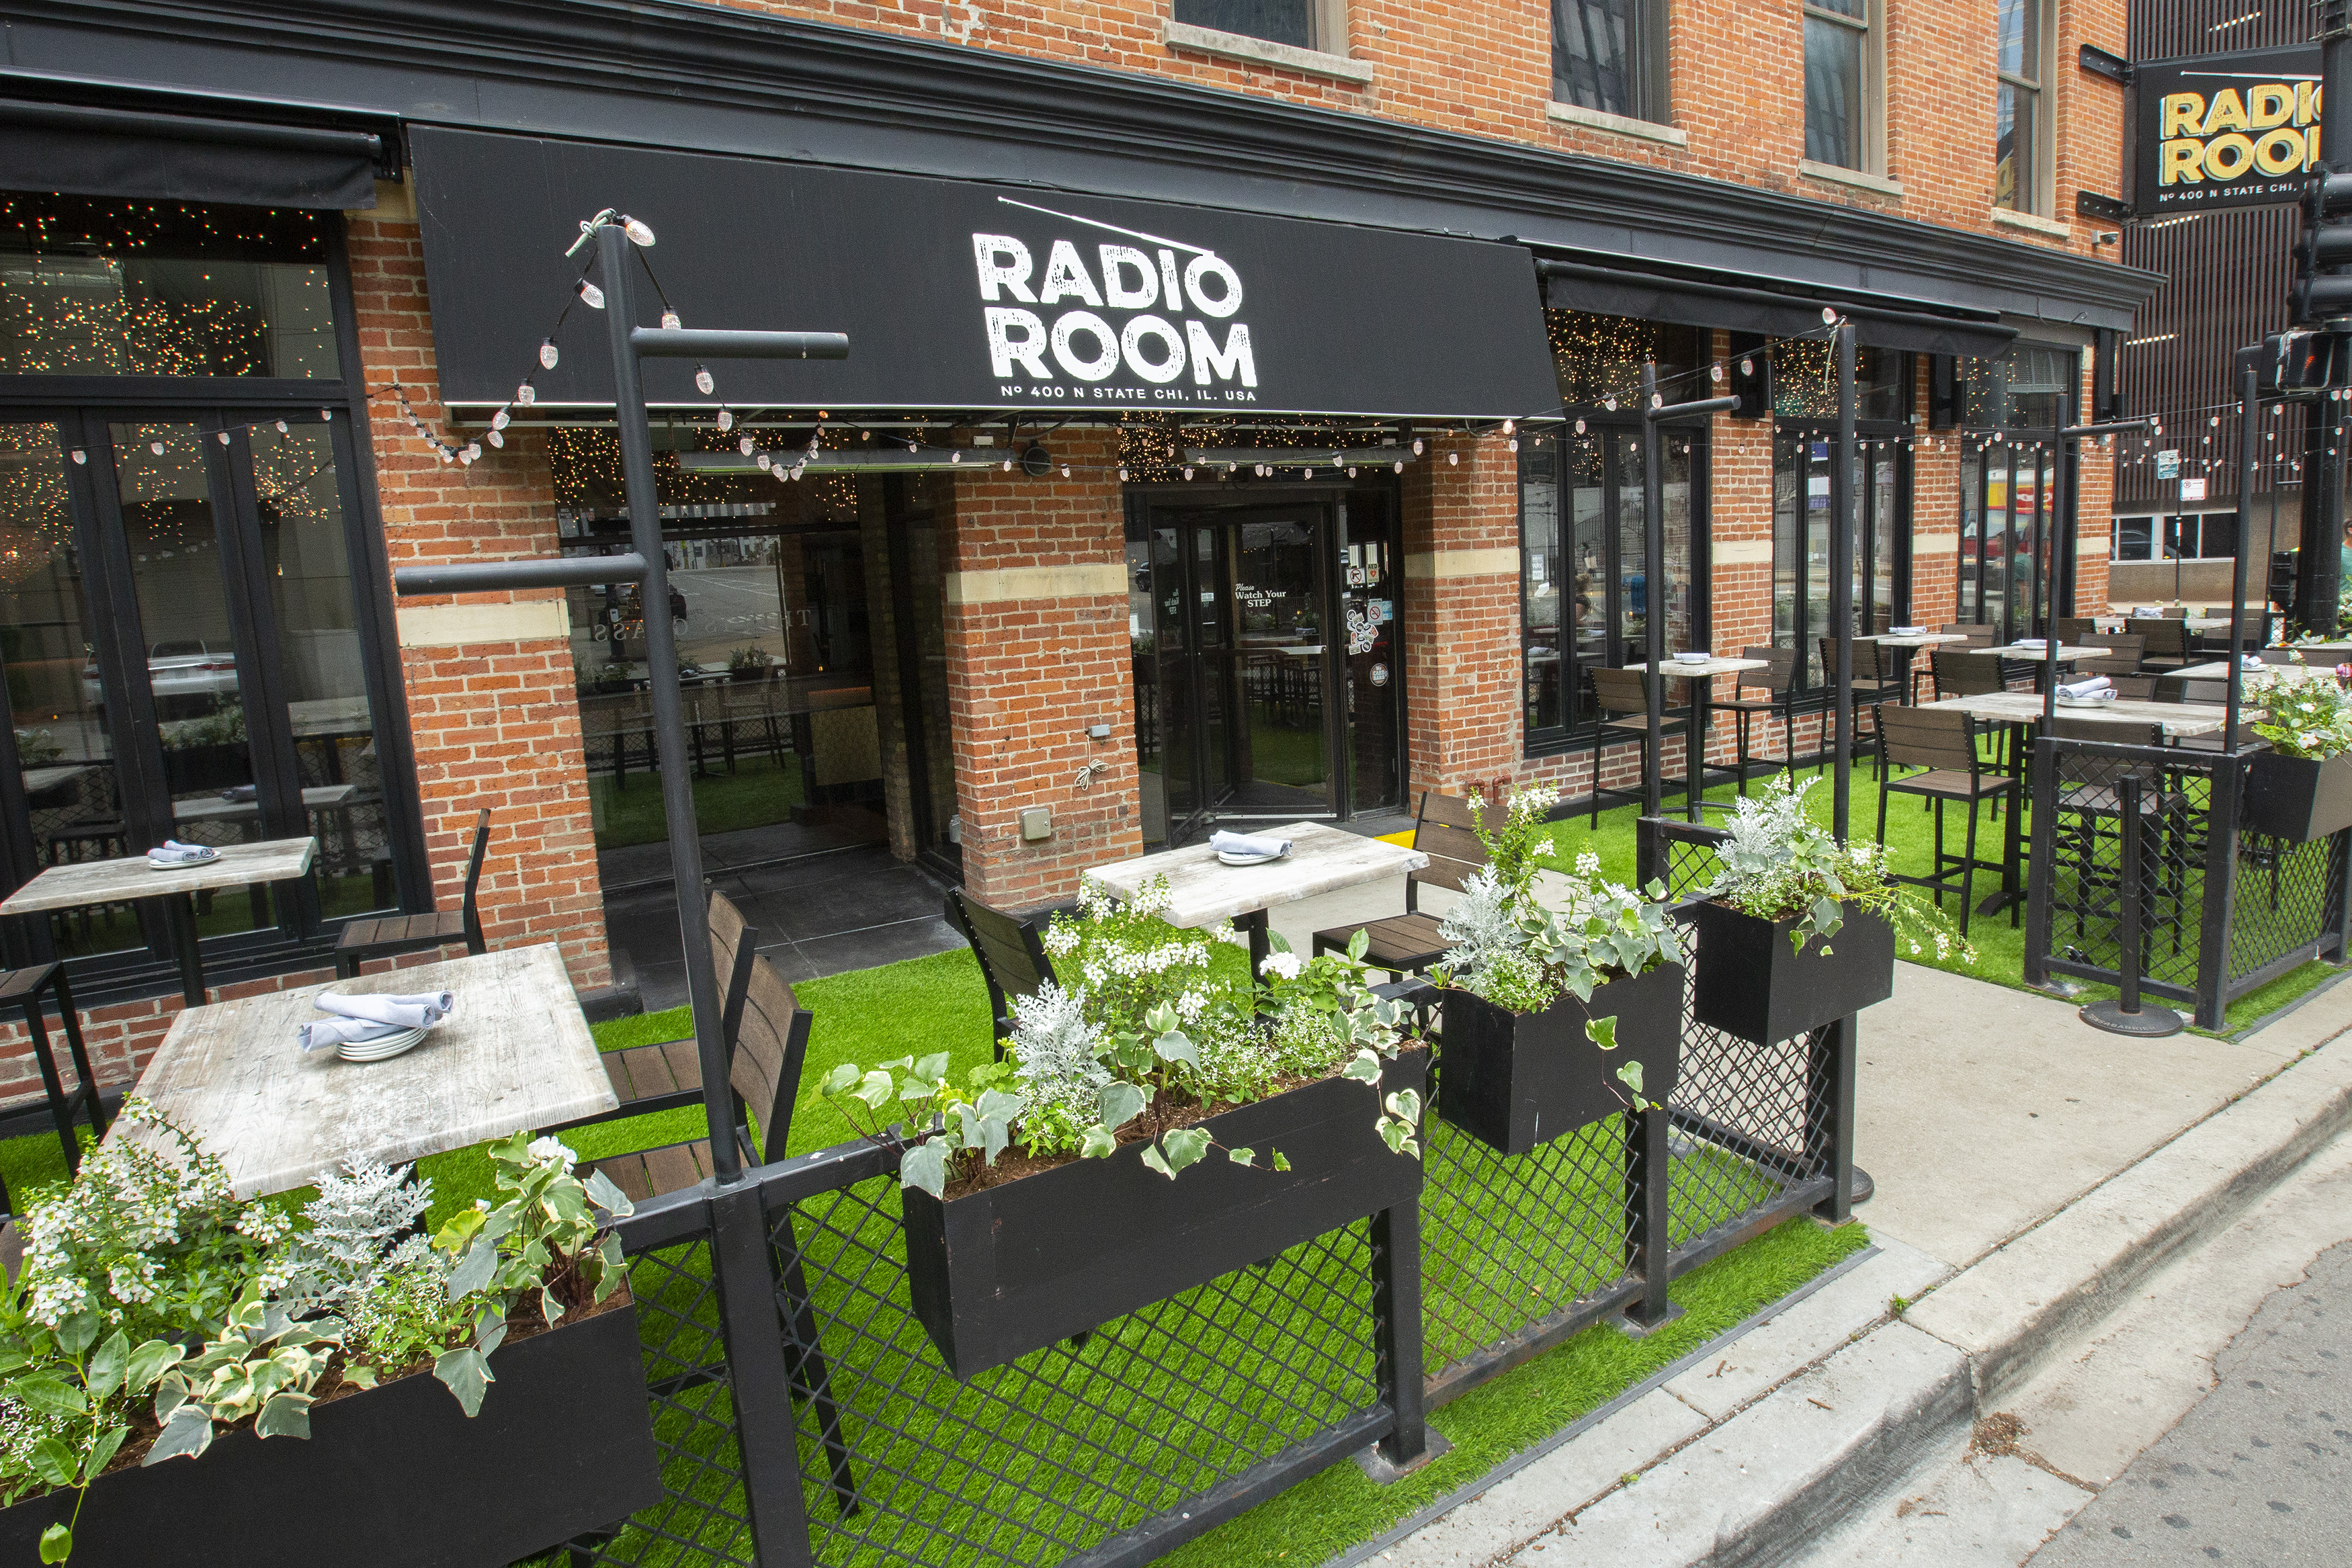 A grassy patio in front of a restaurant entrance with black awning that reads “Radio Room.”